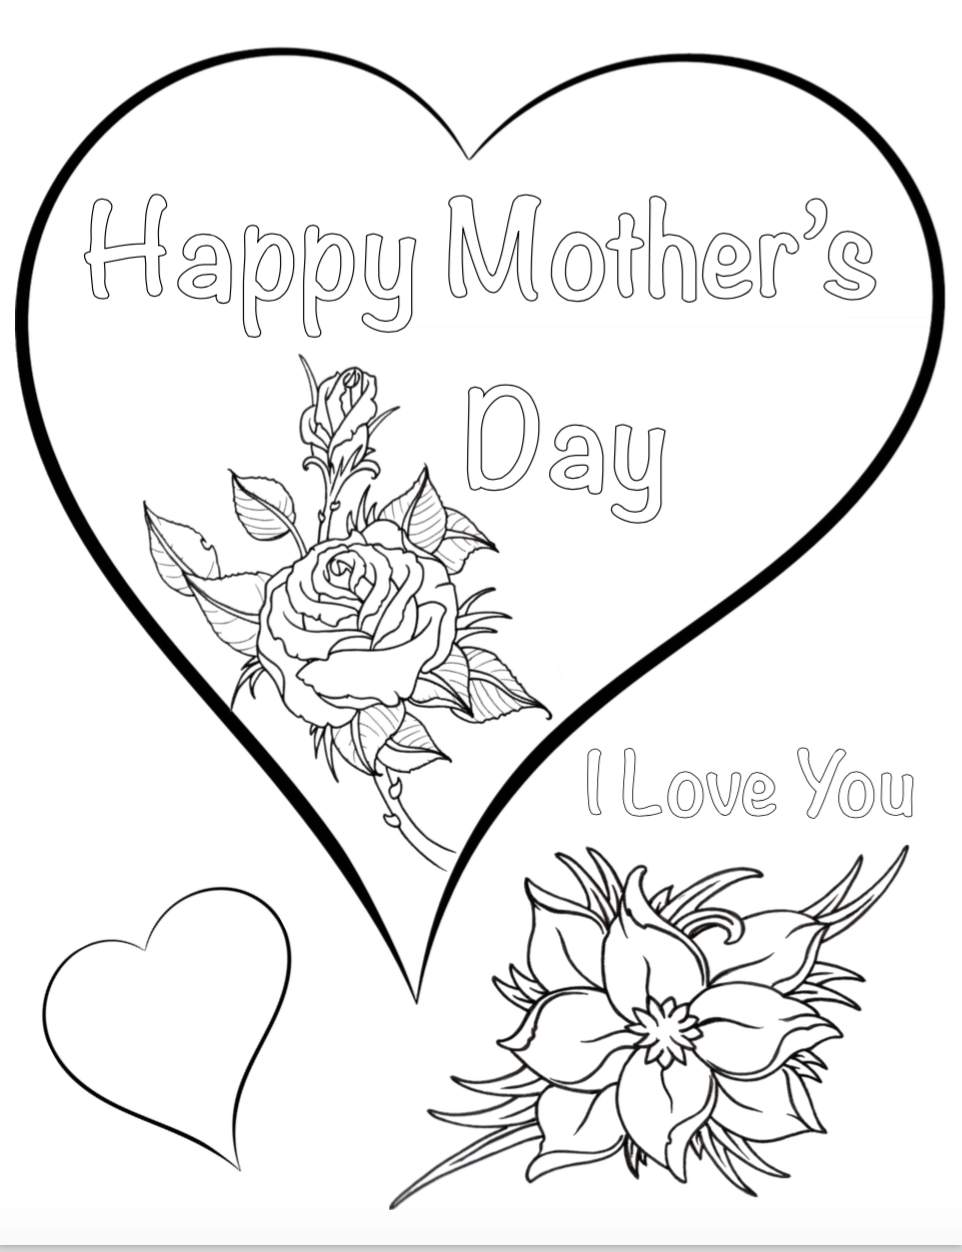 Free Printable Mother's Day Coloring Pages: 4 different ...